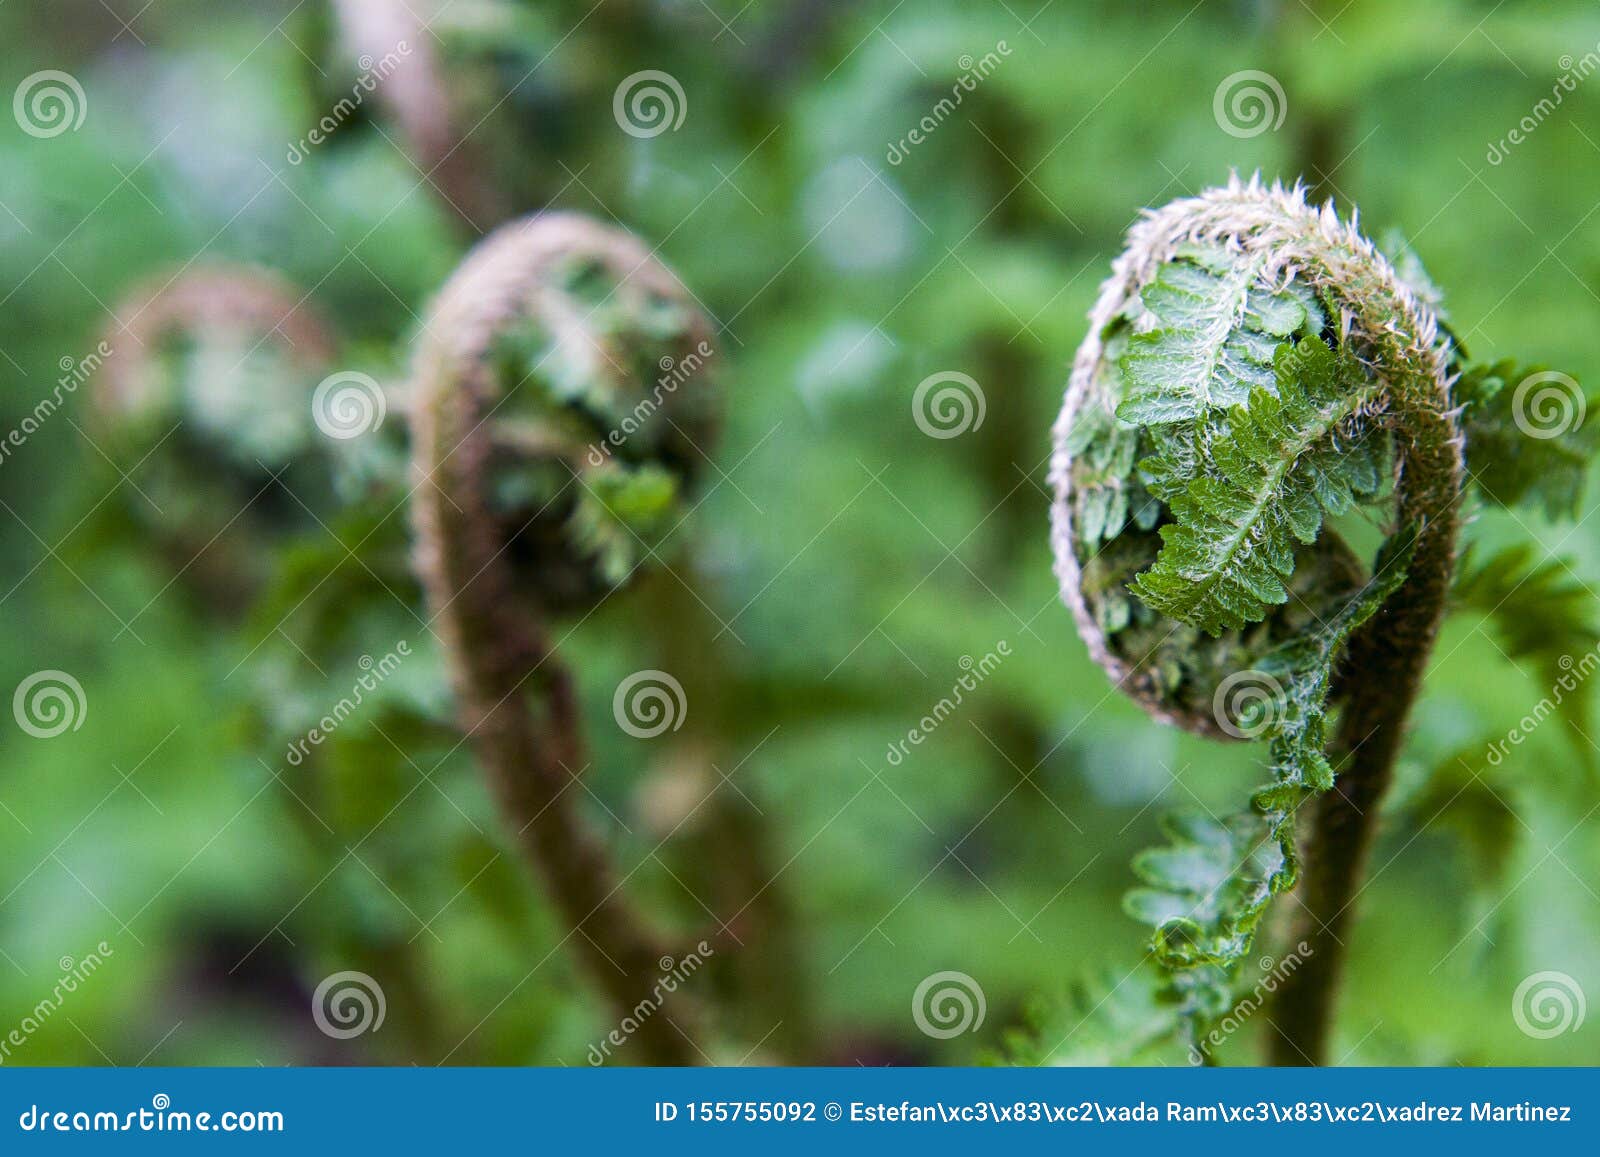 photography of  fern leaves opening.